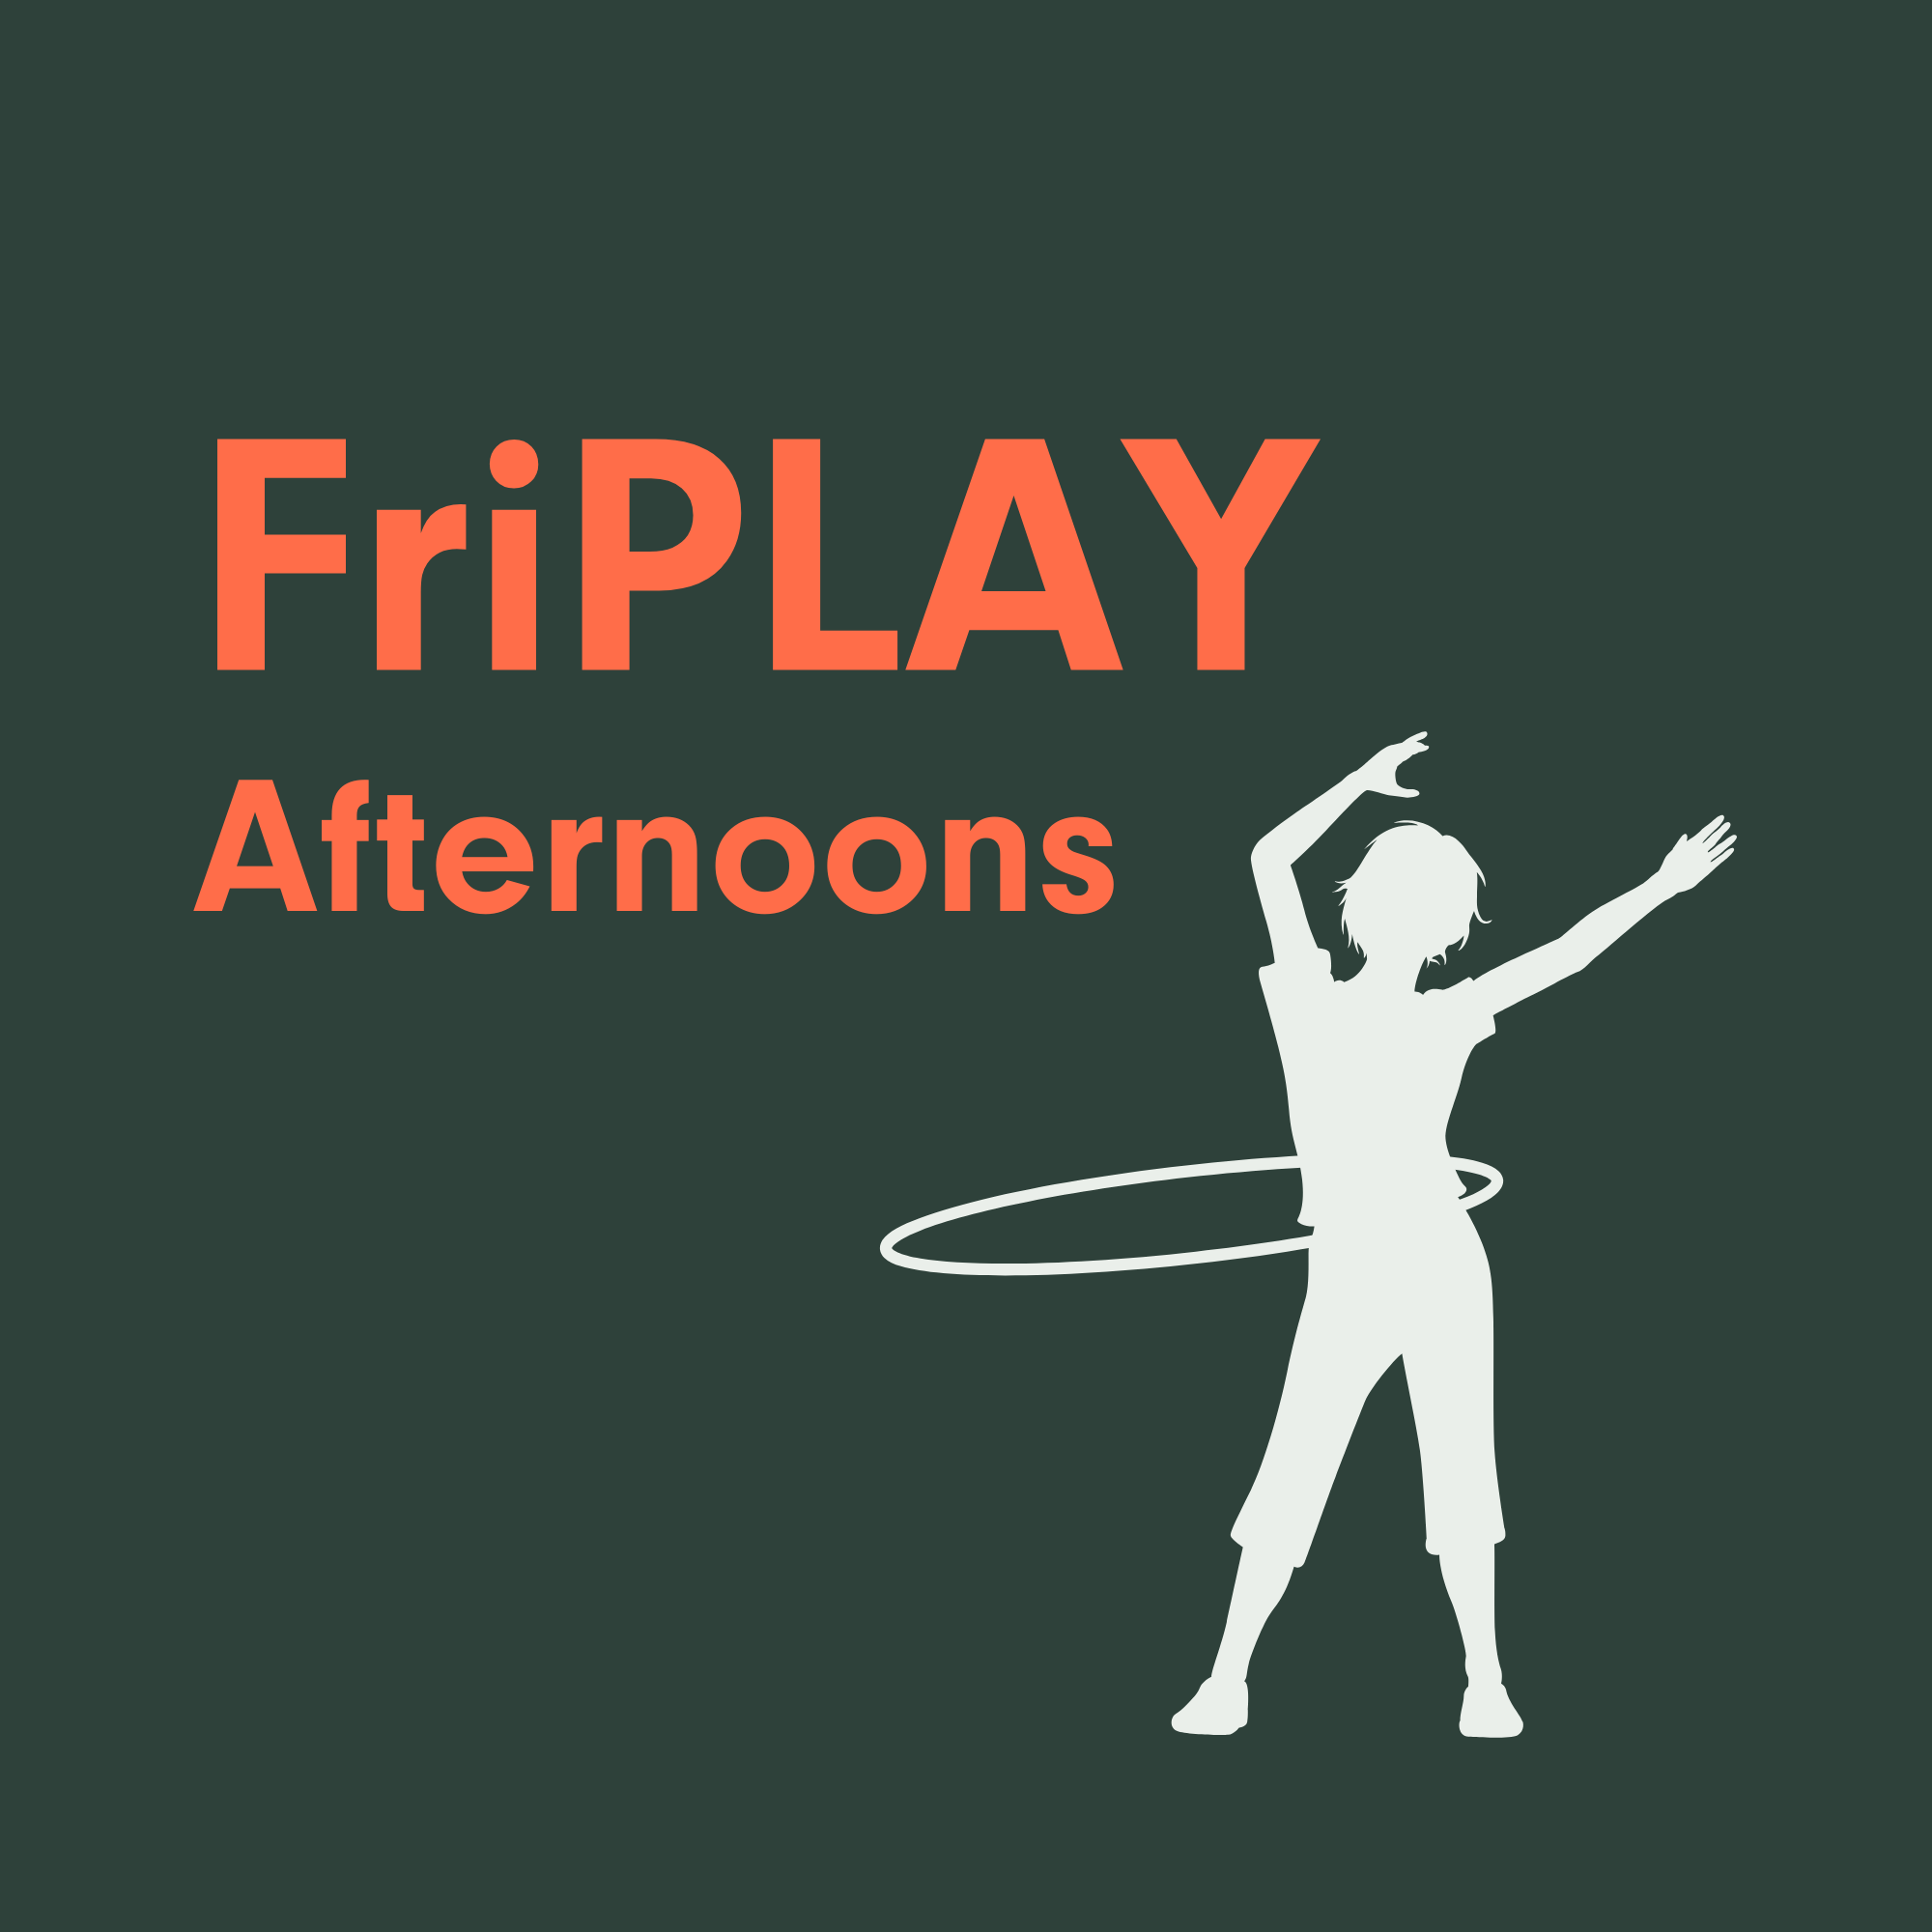 Graphically designed image that says, "FriPLAY Afternoons" with a white figure jumping rope.